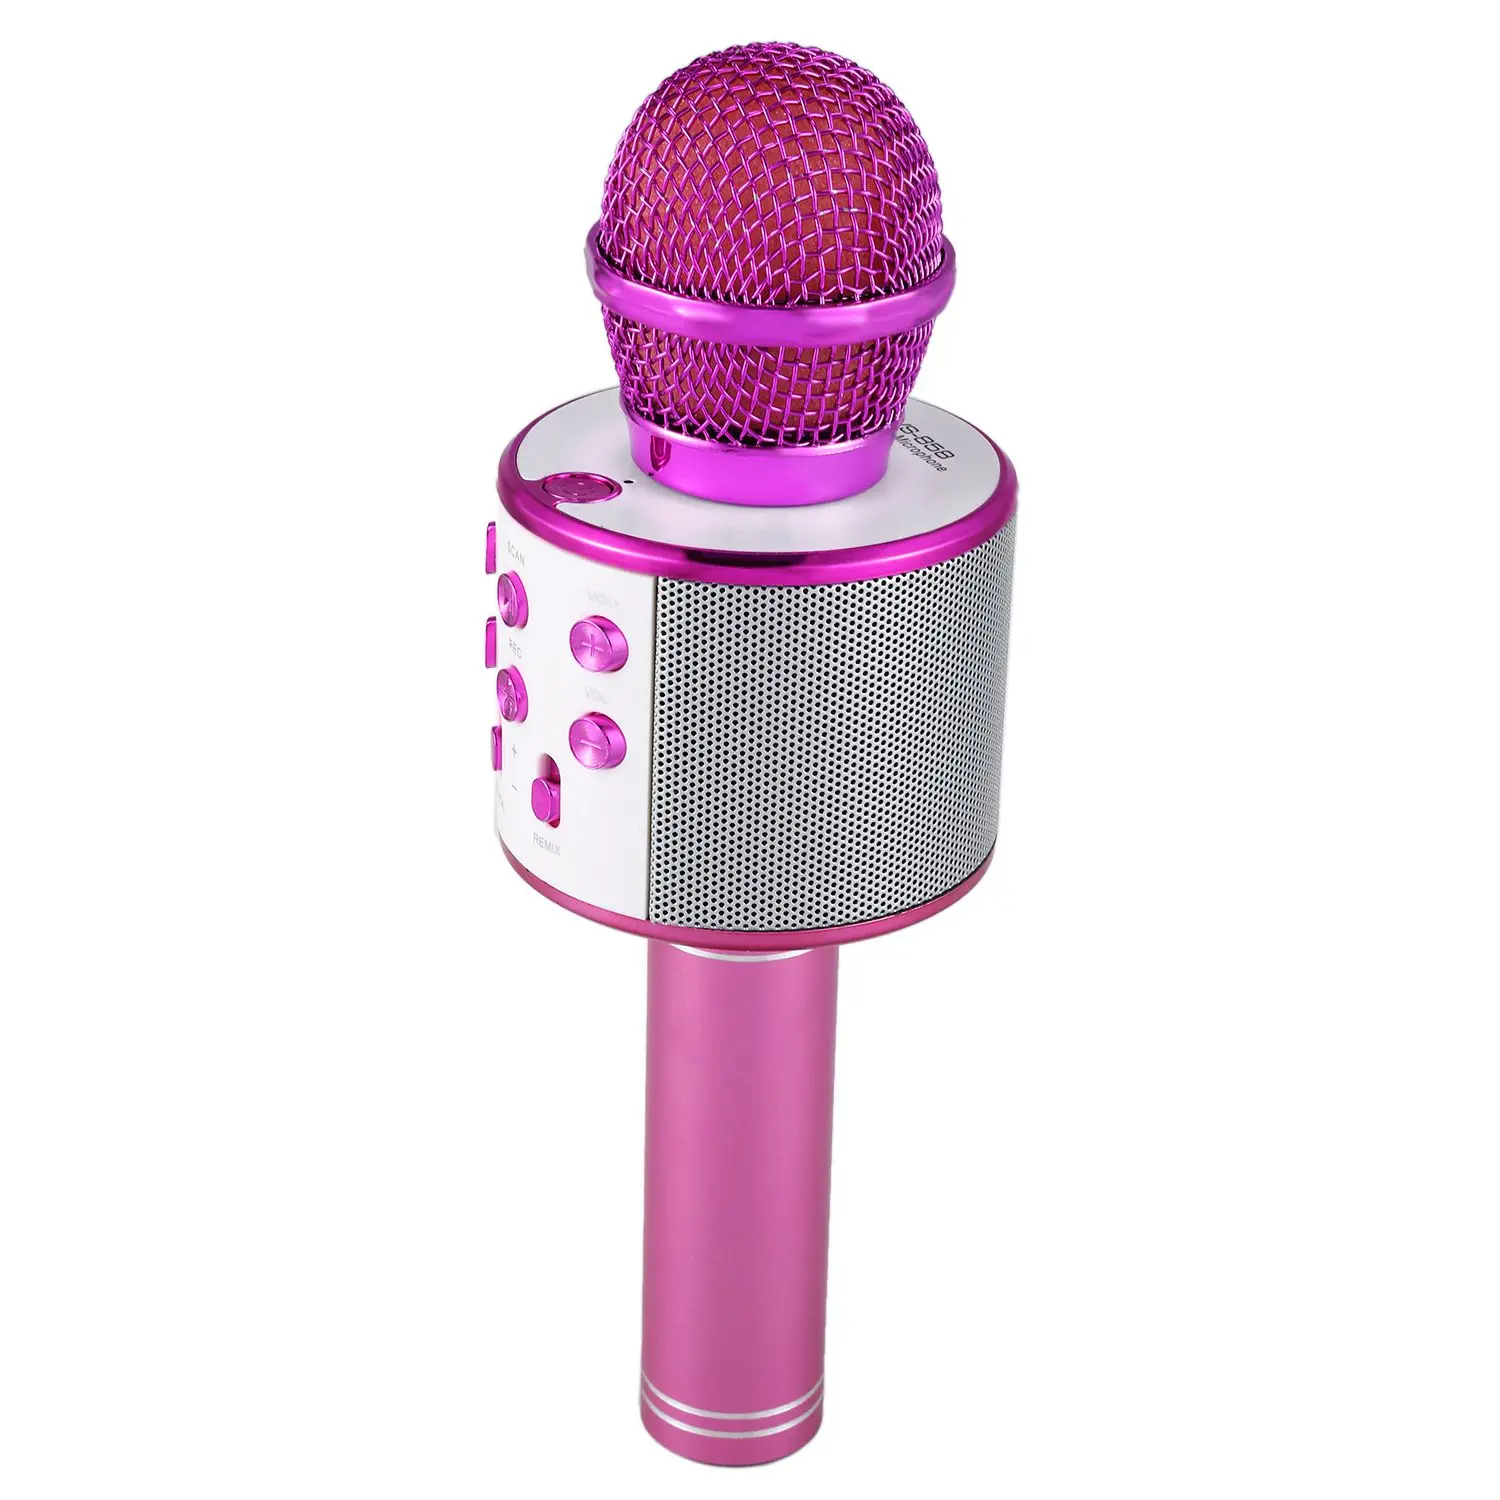 

Wireless Karaoke Microphone Portable Bluetooth mini home KTV for Music Playing and Singing Speaker Player Selfie PHONE PC Purple